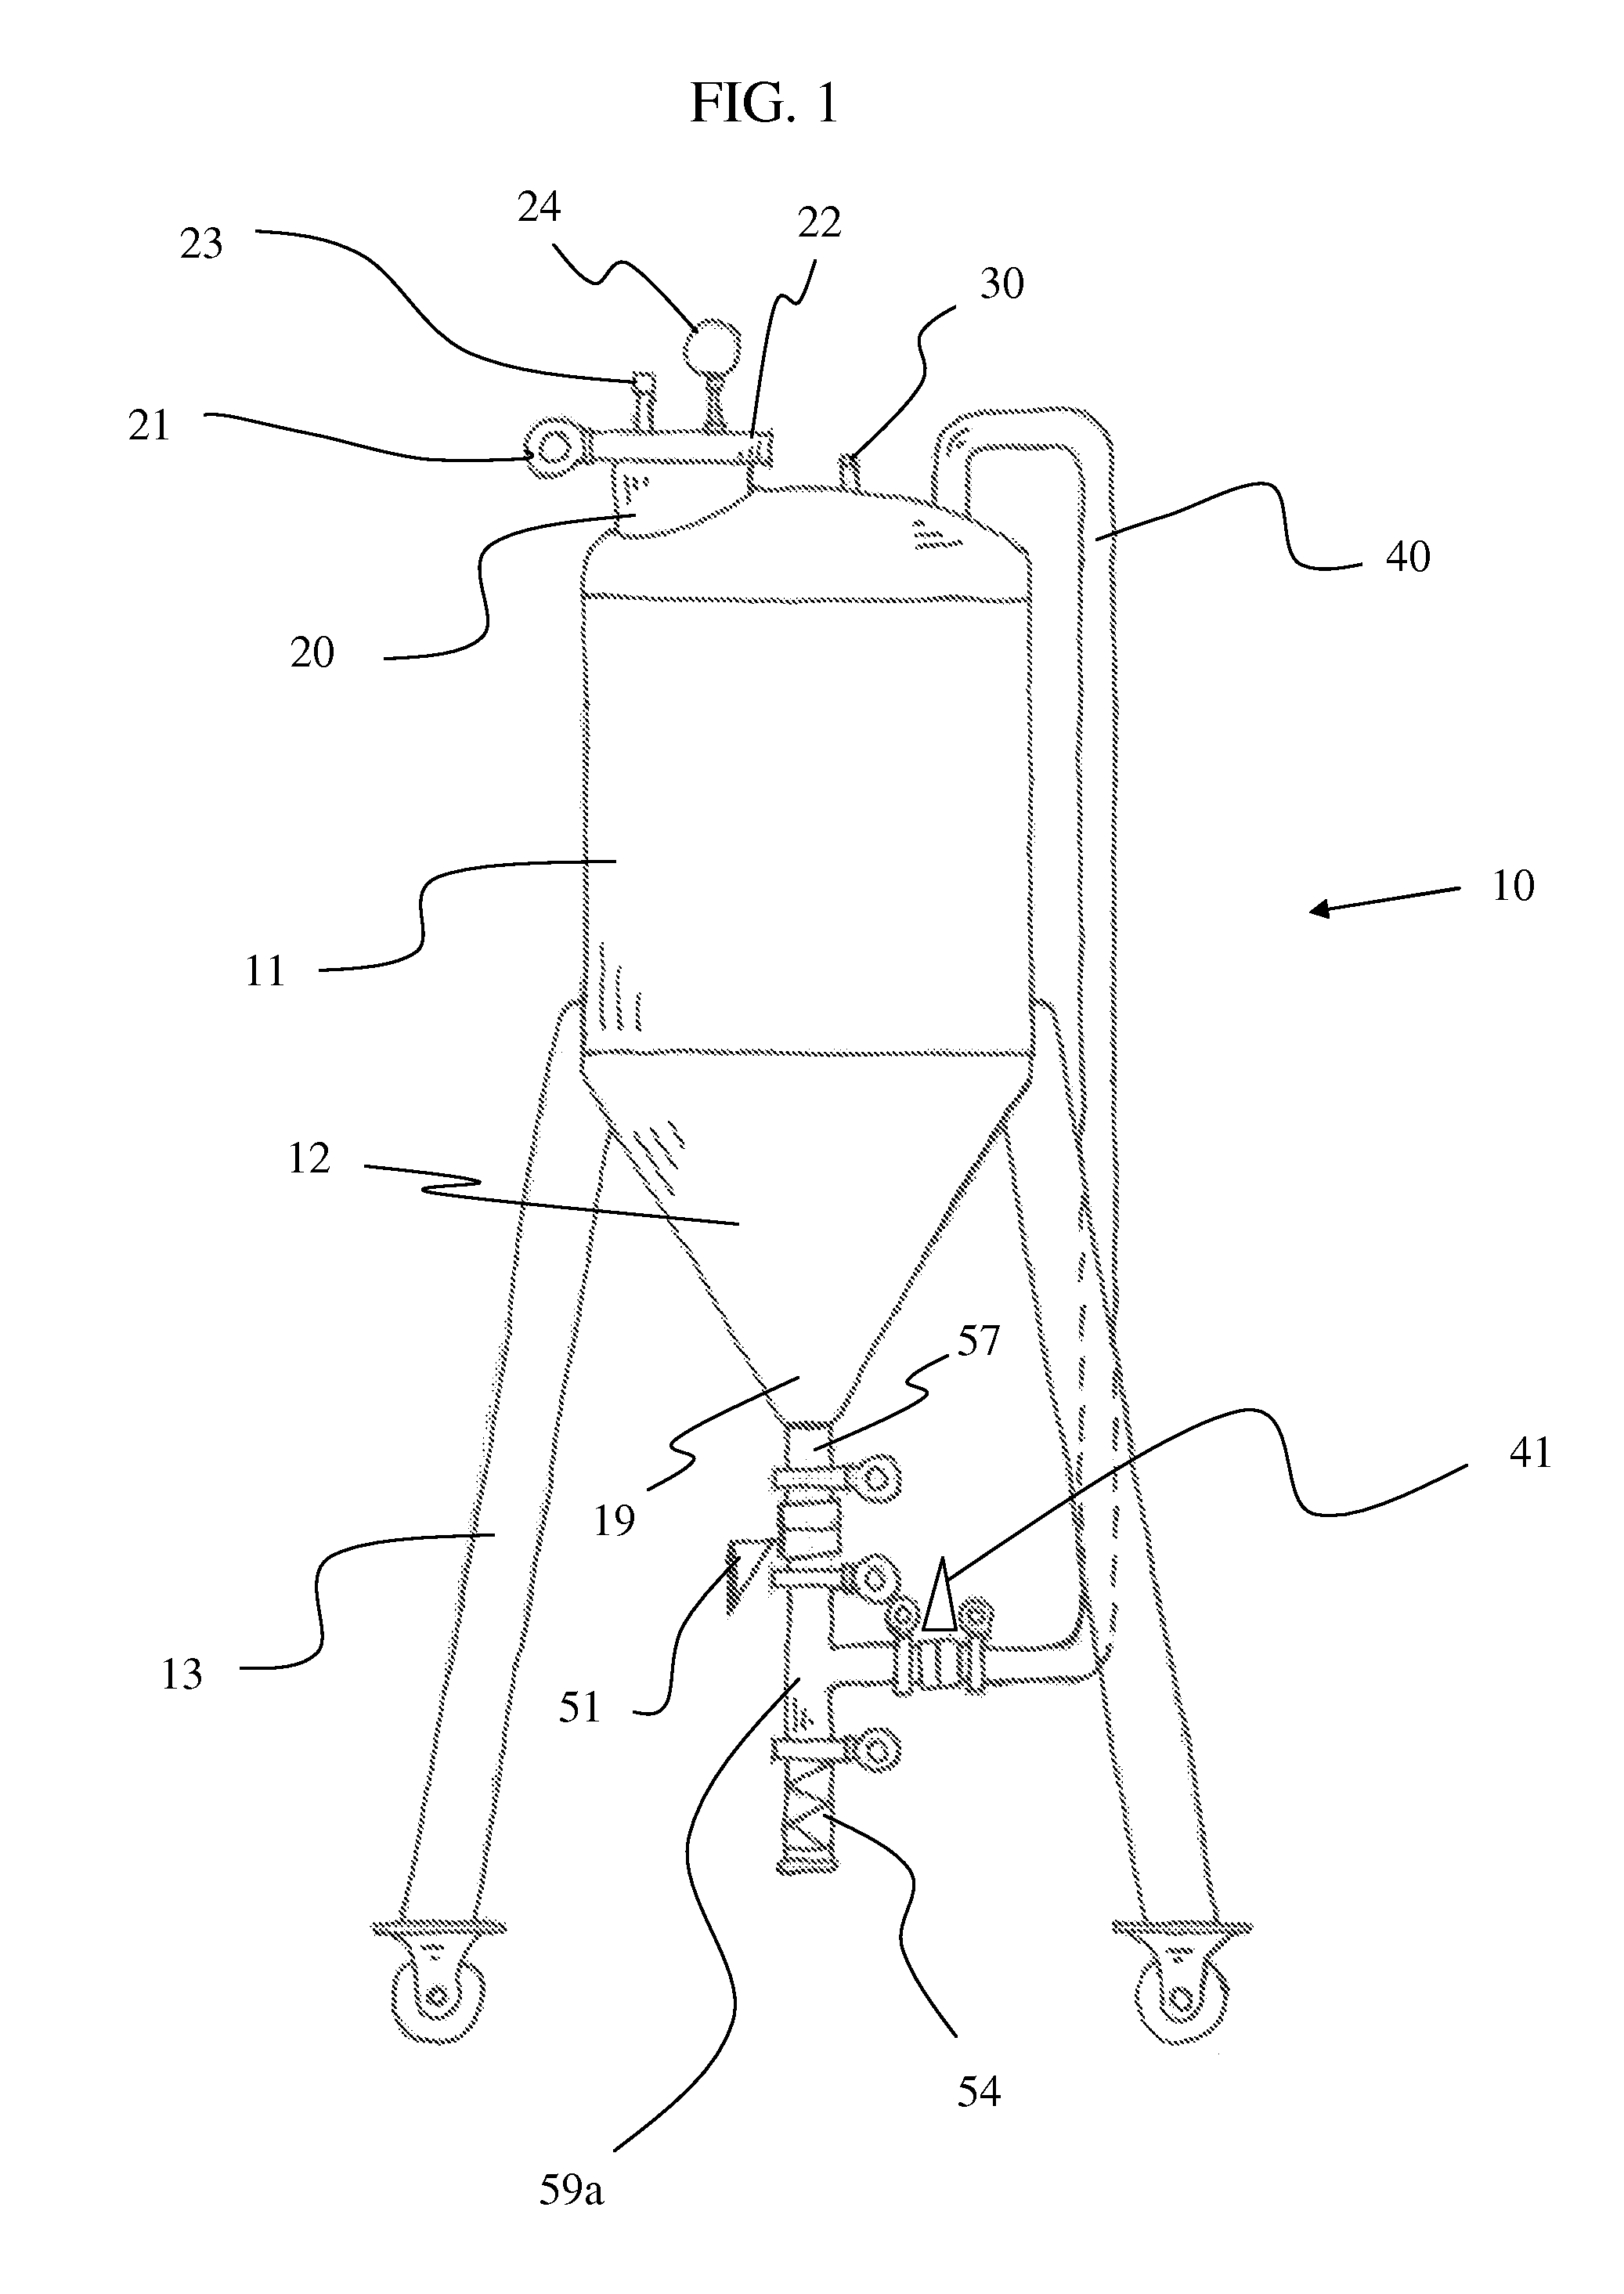 Apparatus, system and method for adding hops or other ingredients to beverage